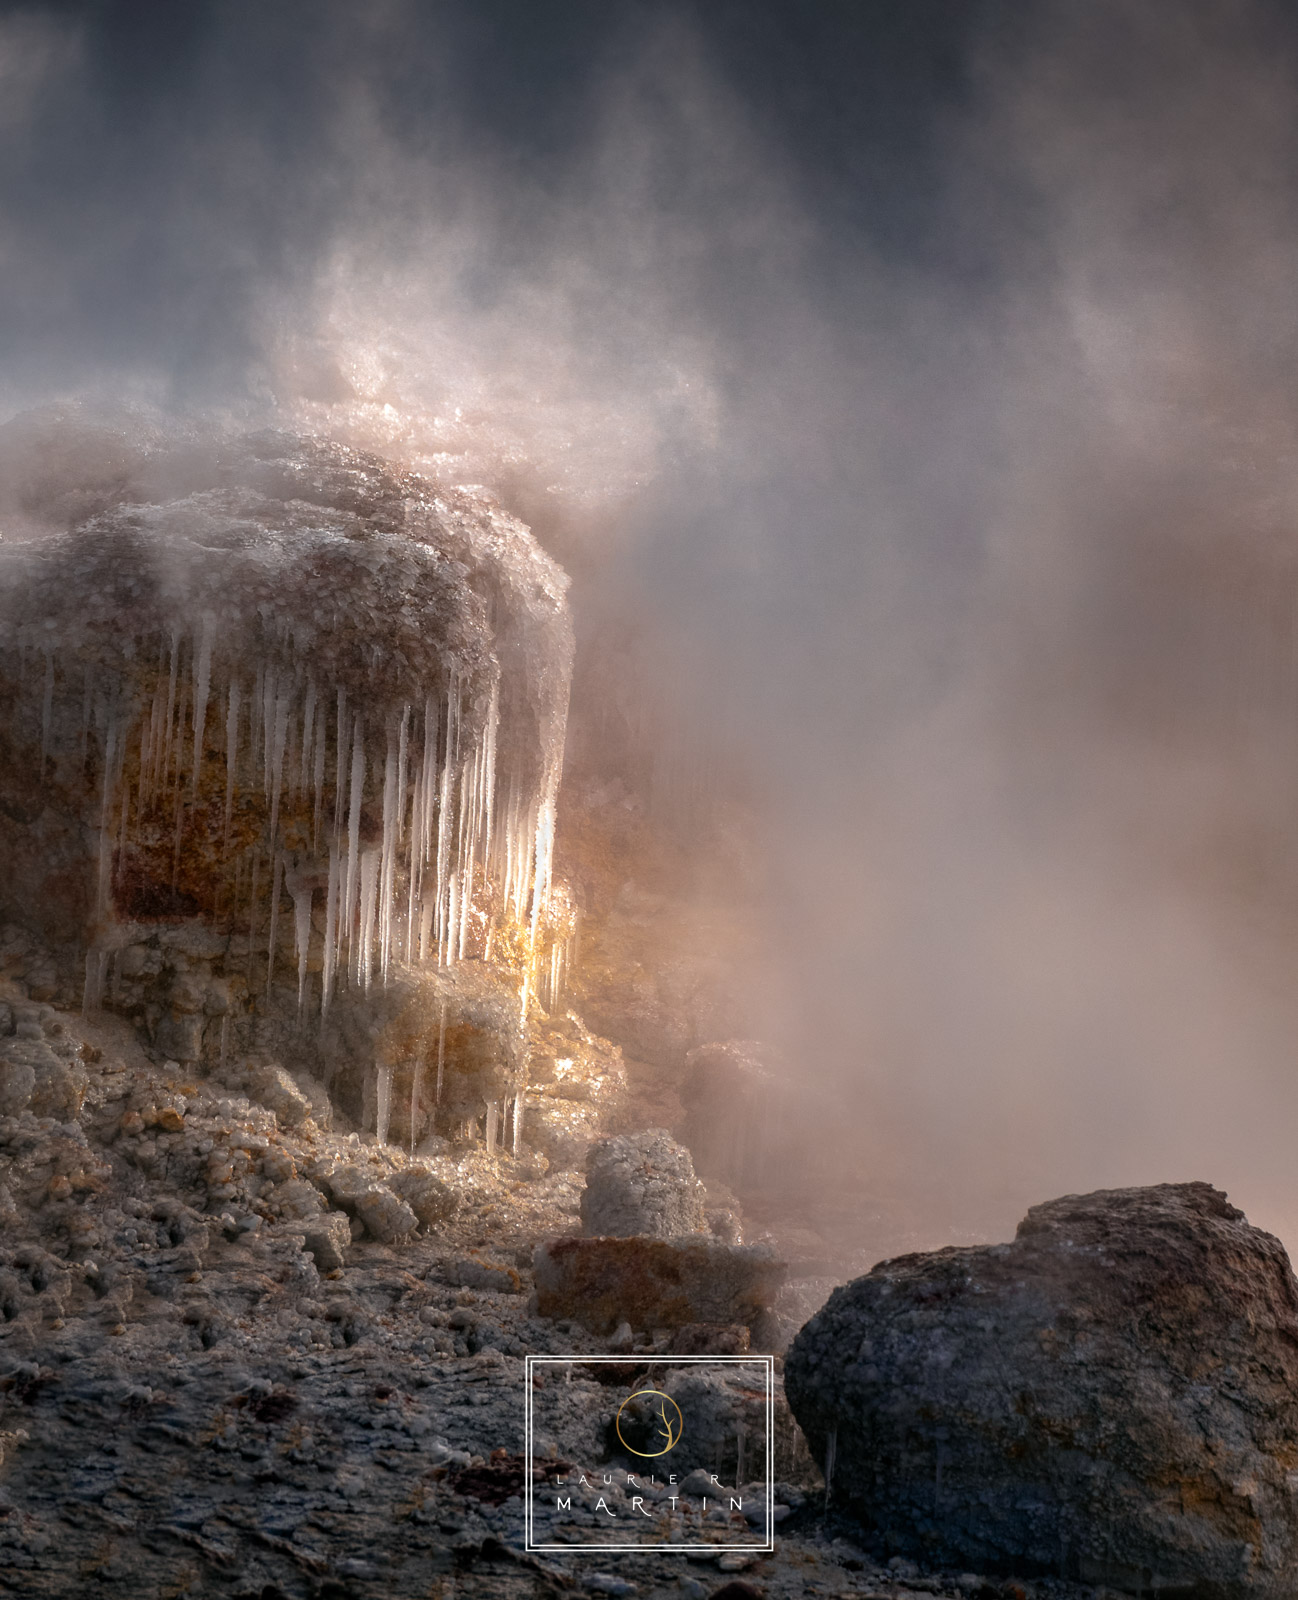 Steam drifts off from the hot geothermal pools landing on rocks and trees creating a build up of ice. The layers of ice can have...